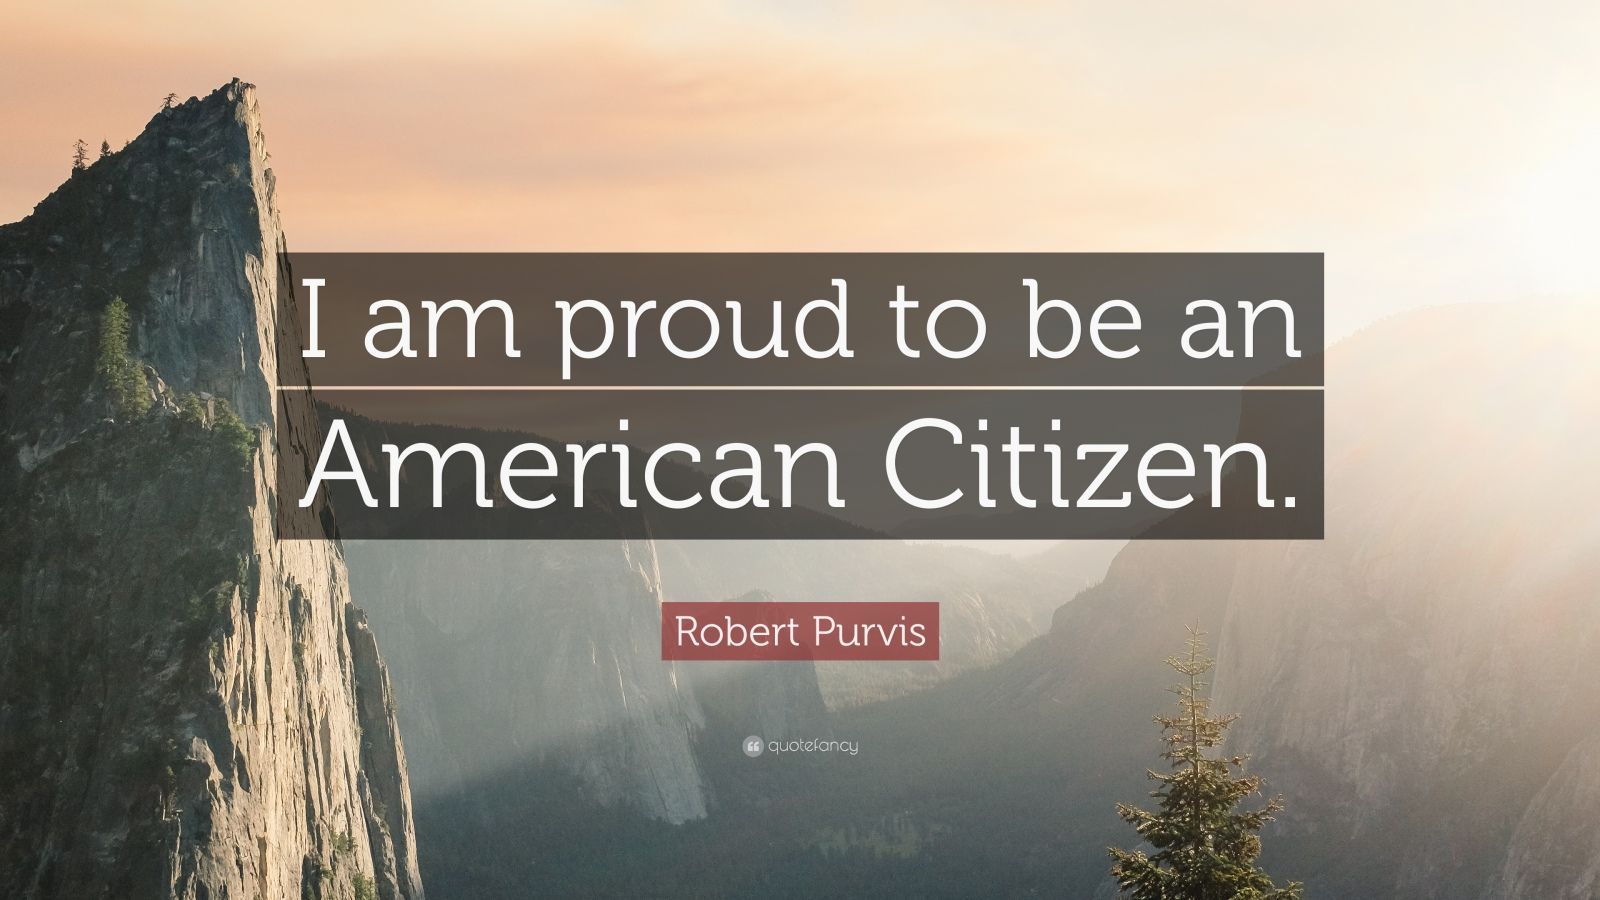 I Like To Be In America Robert Purvis Quote: “I am proud to be an American Citizen.”